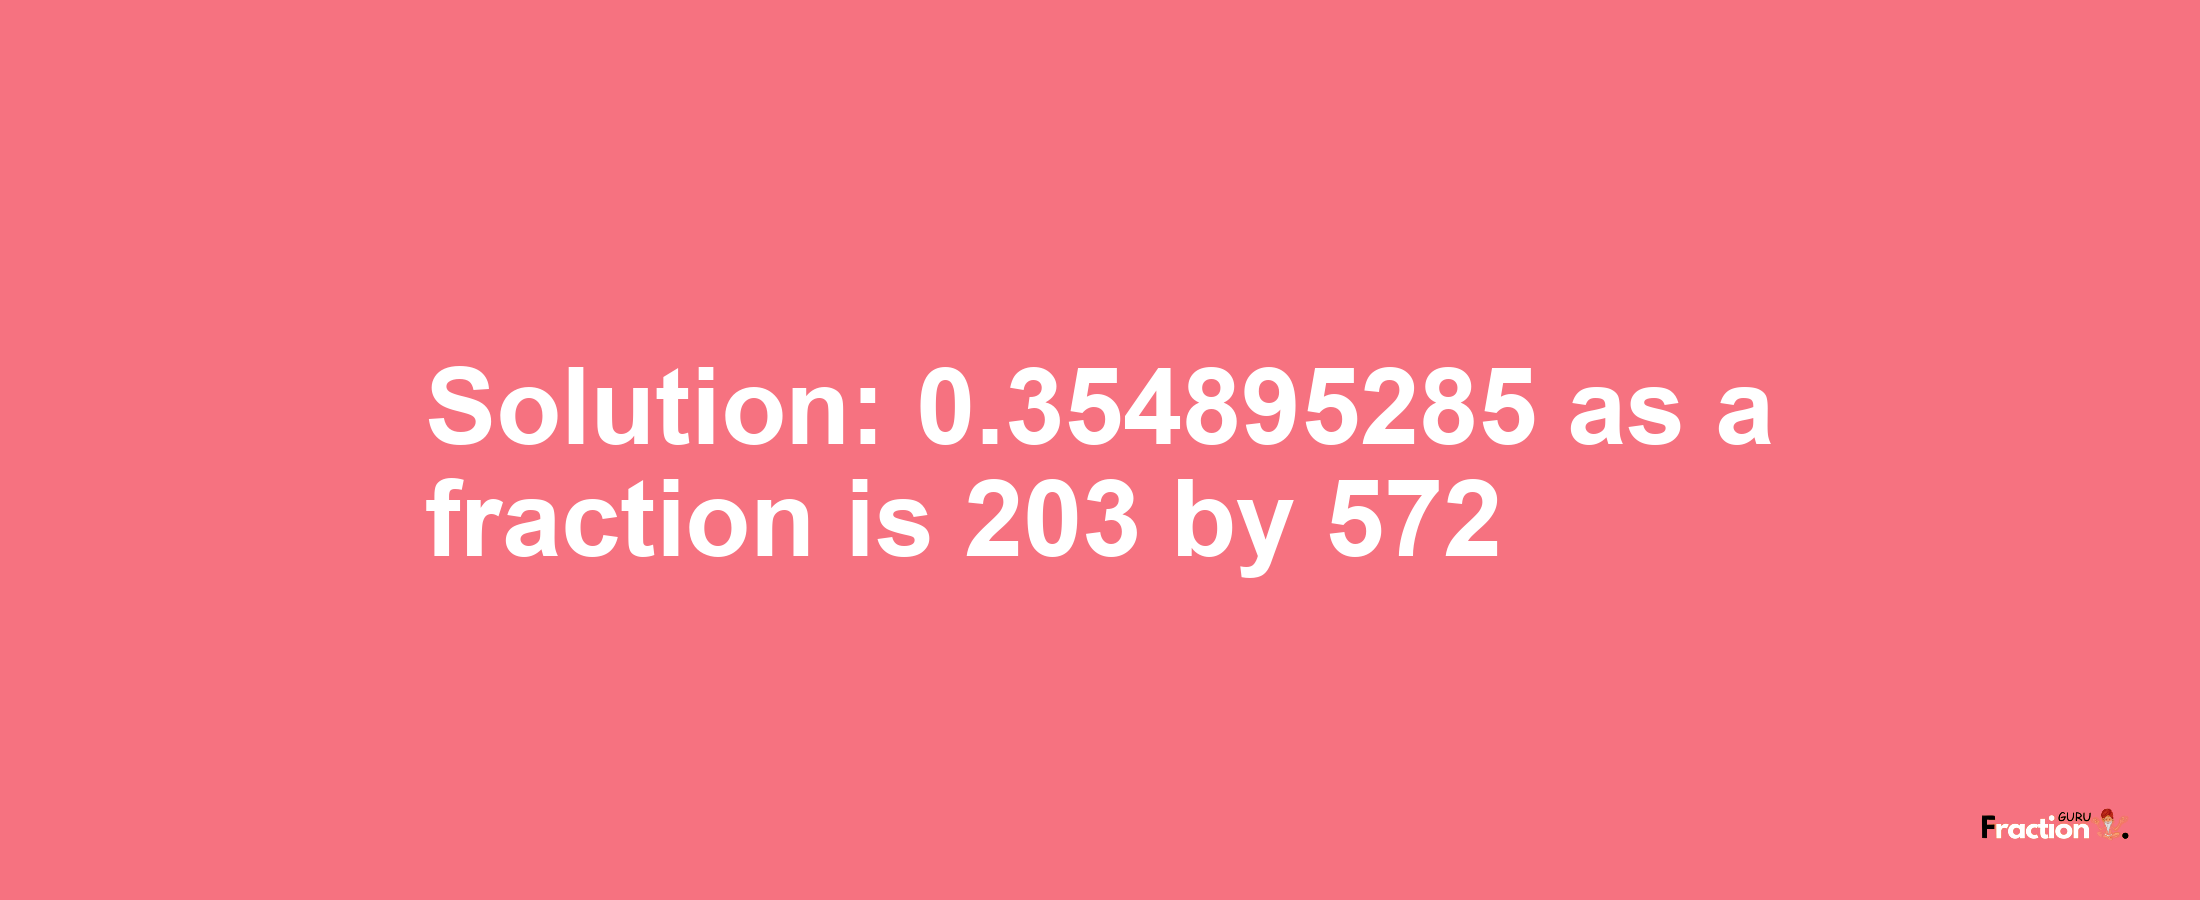 Solution:0.354895285 as a fraction is 203/572